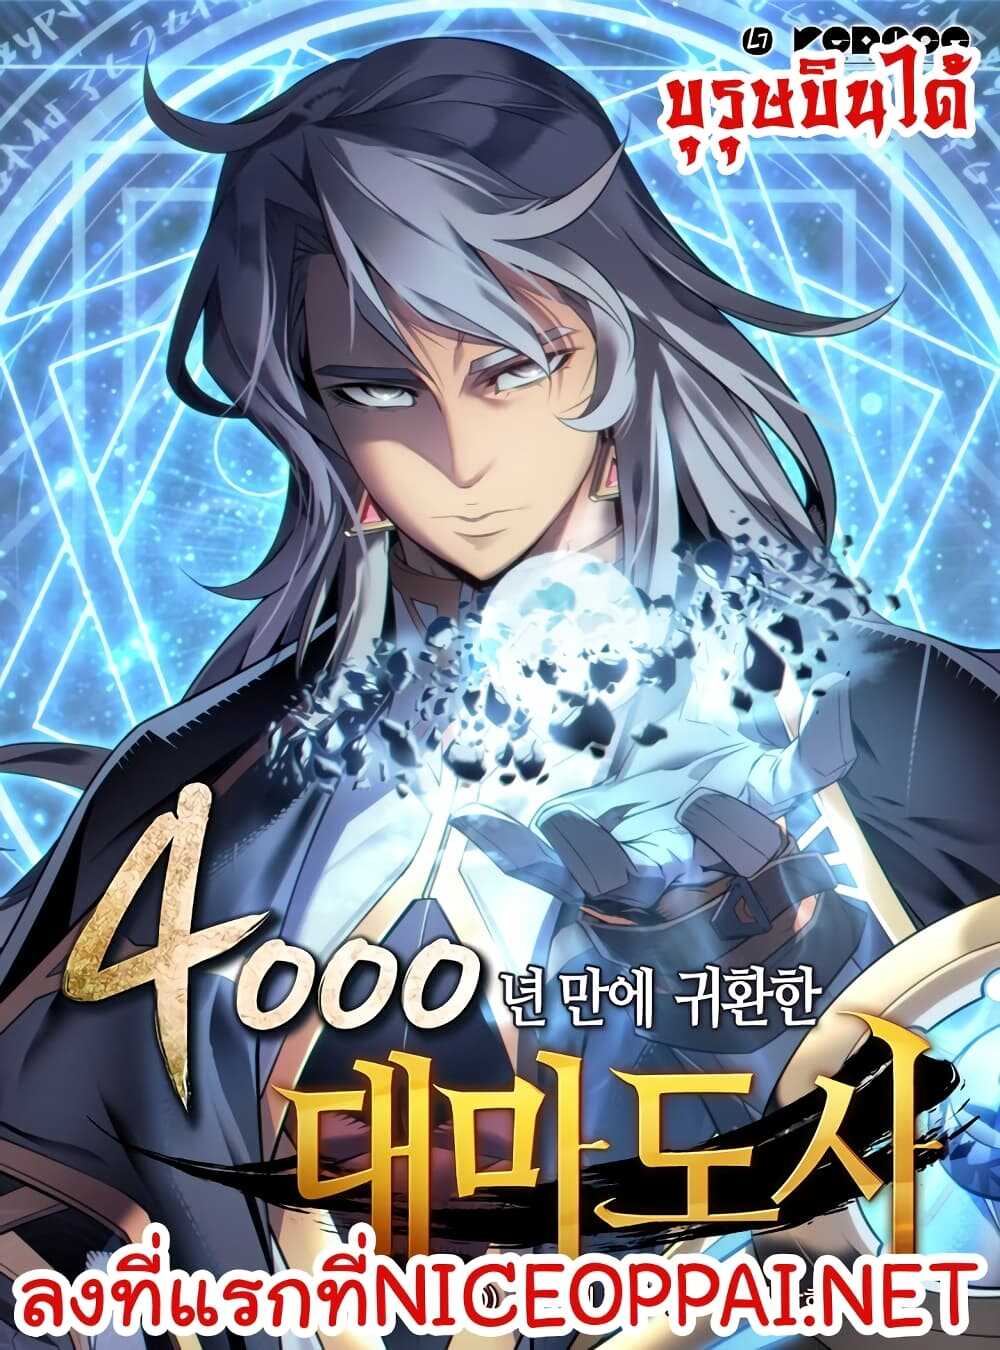 The Great Mage Returns After 4000 Years 26 (1)